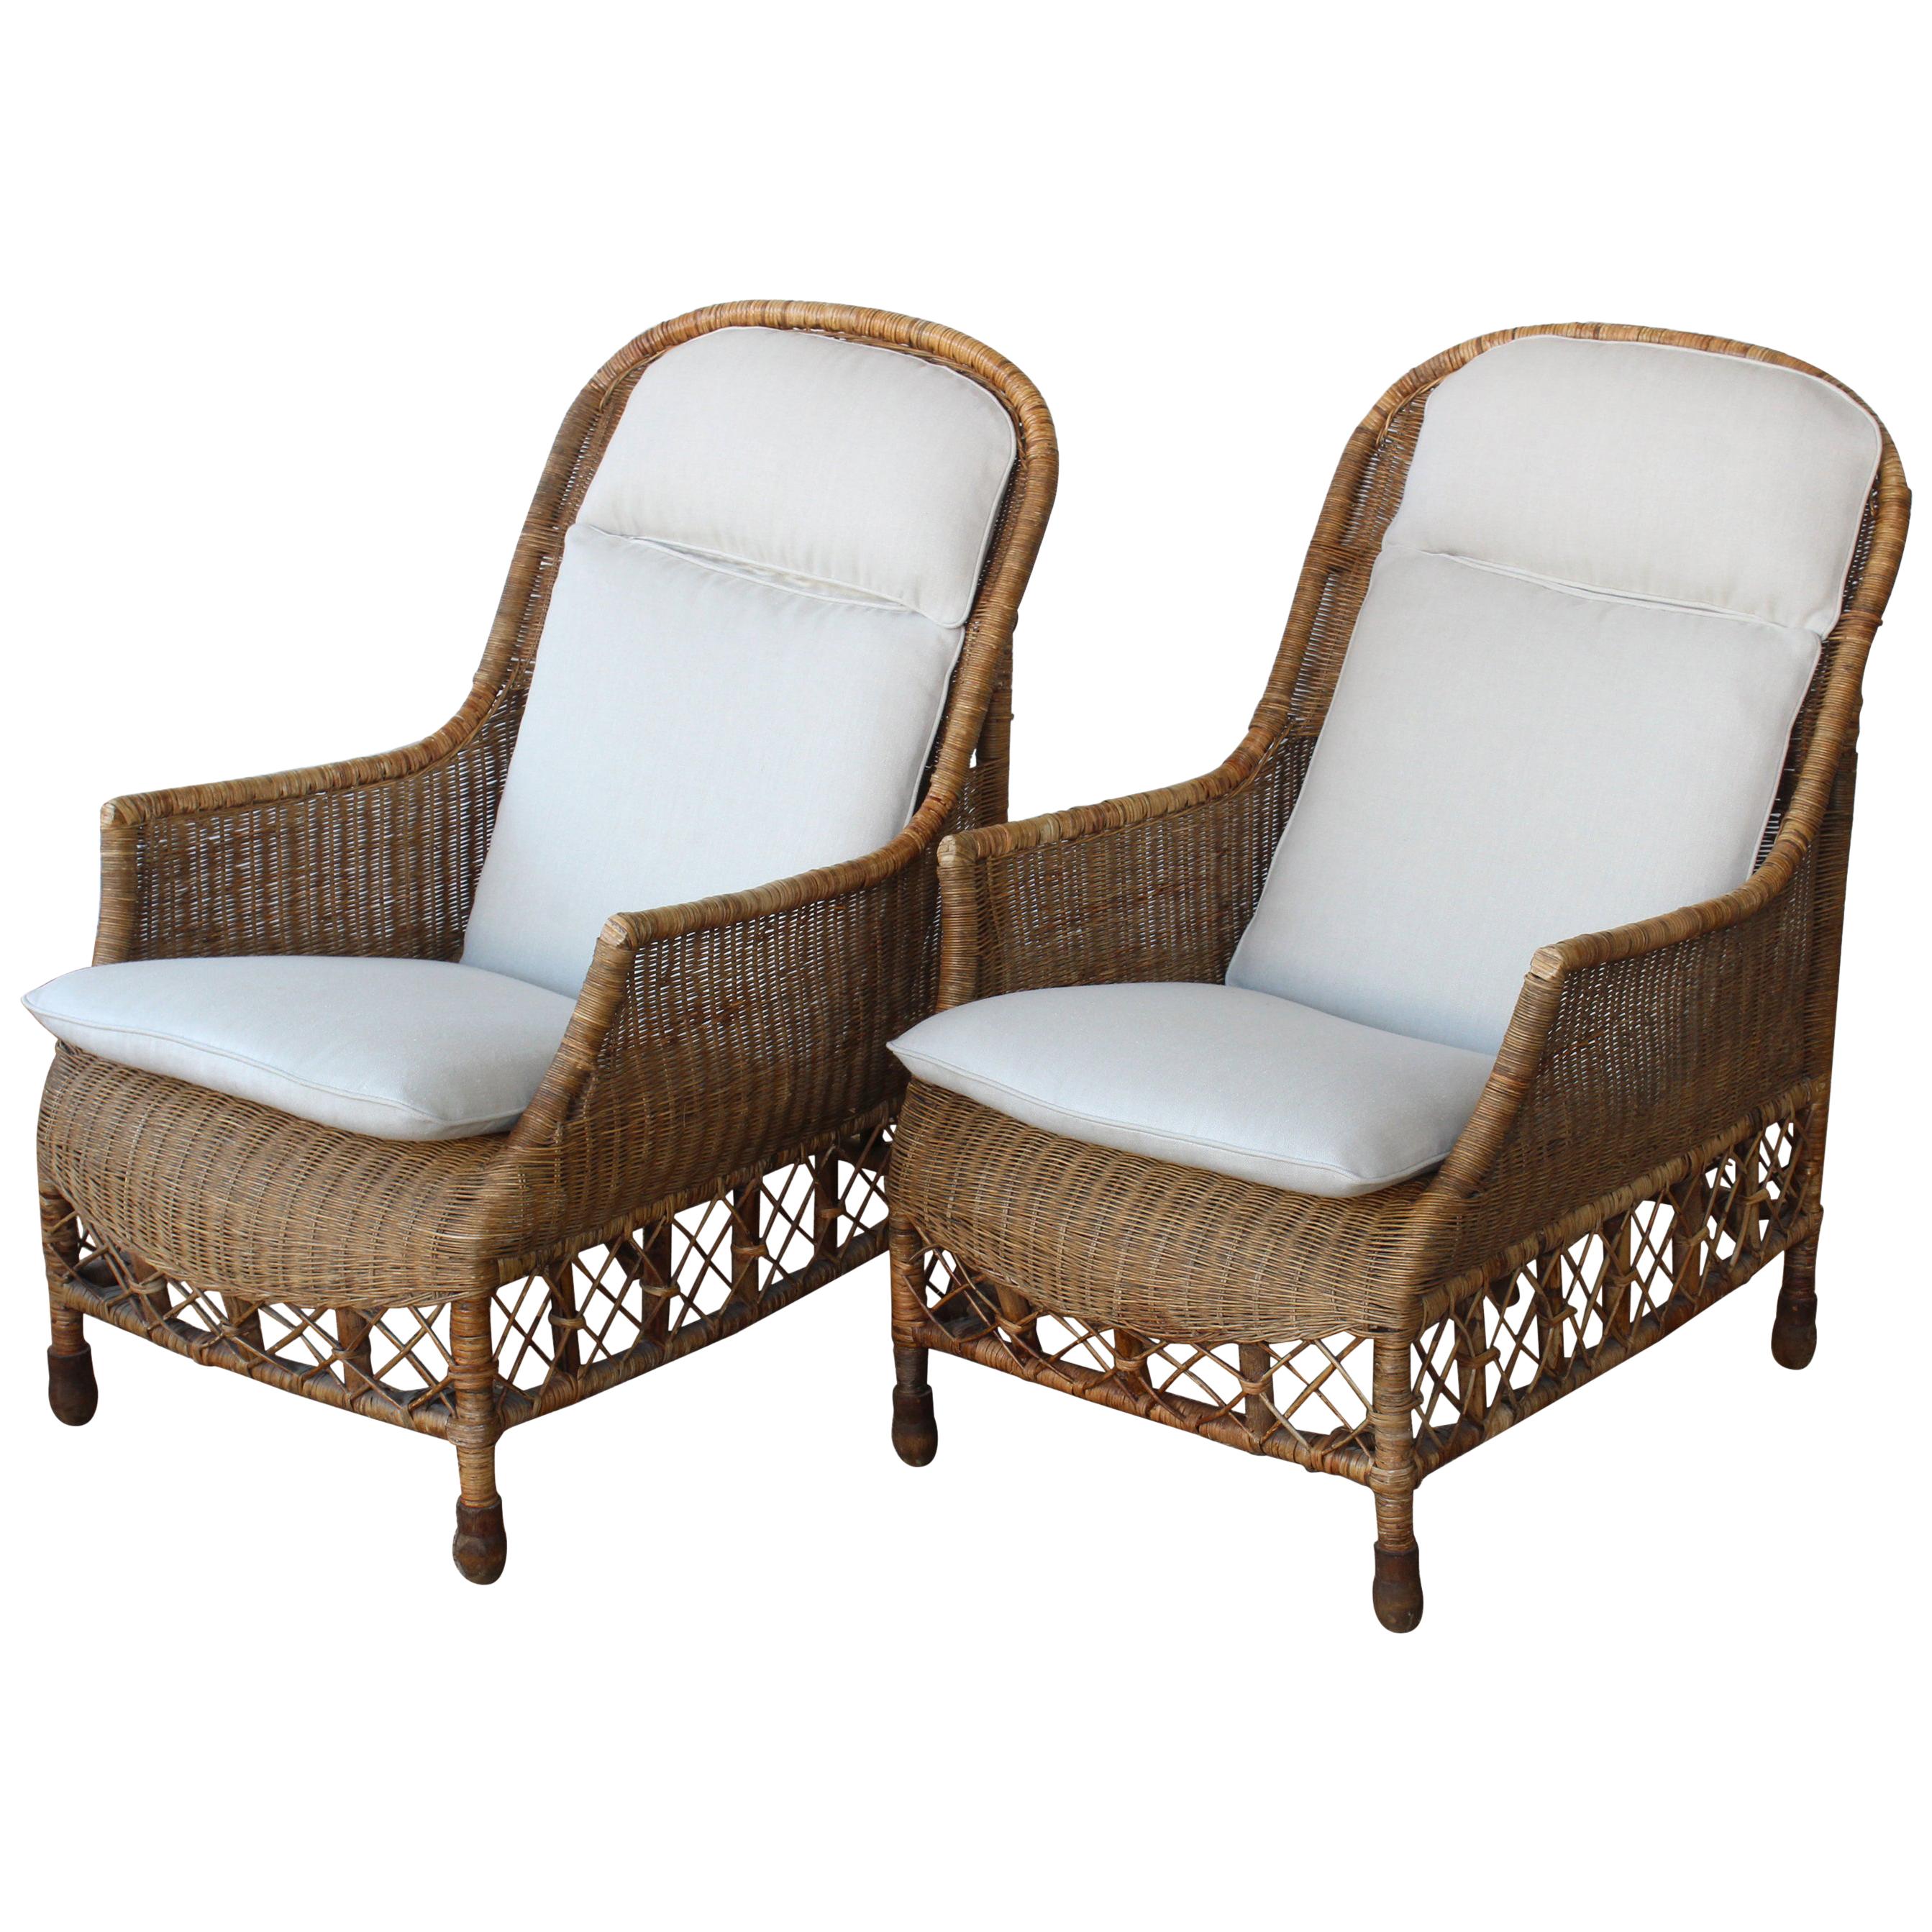 Bamboo and Wicker Lounge Chair, Italy, 1960s. One Available. 